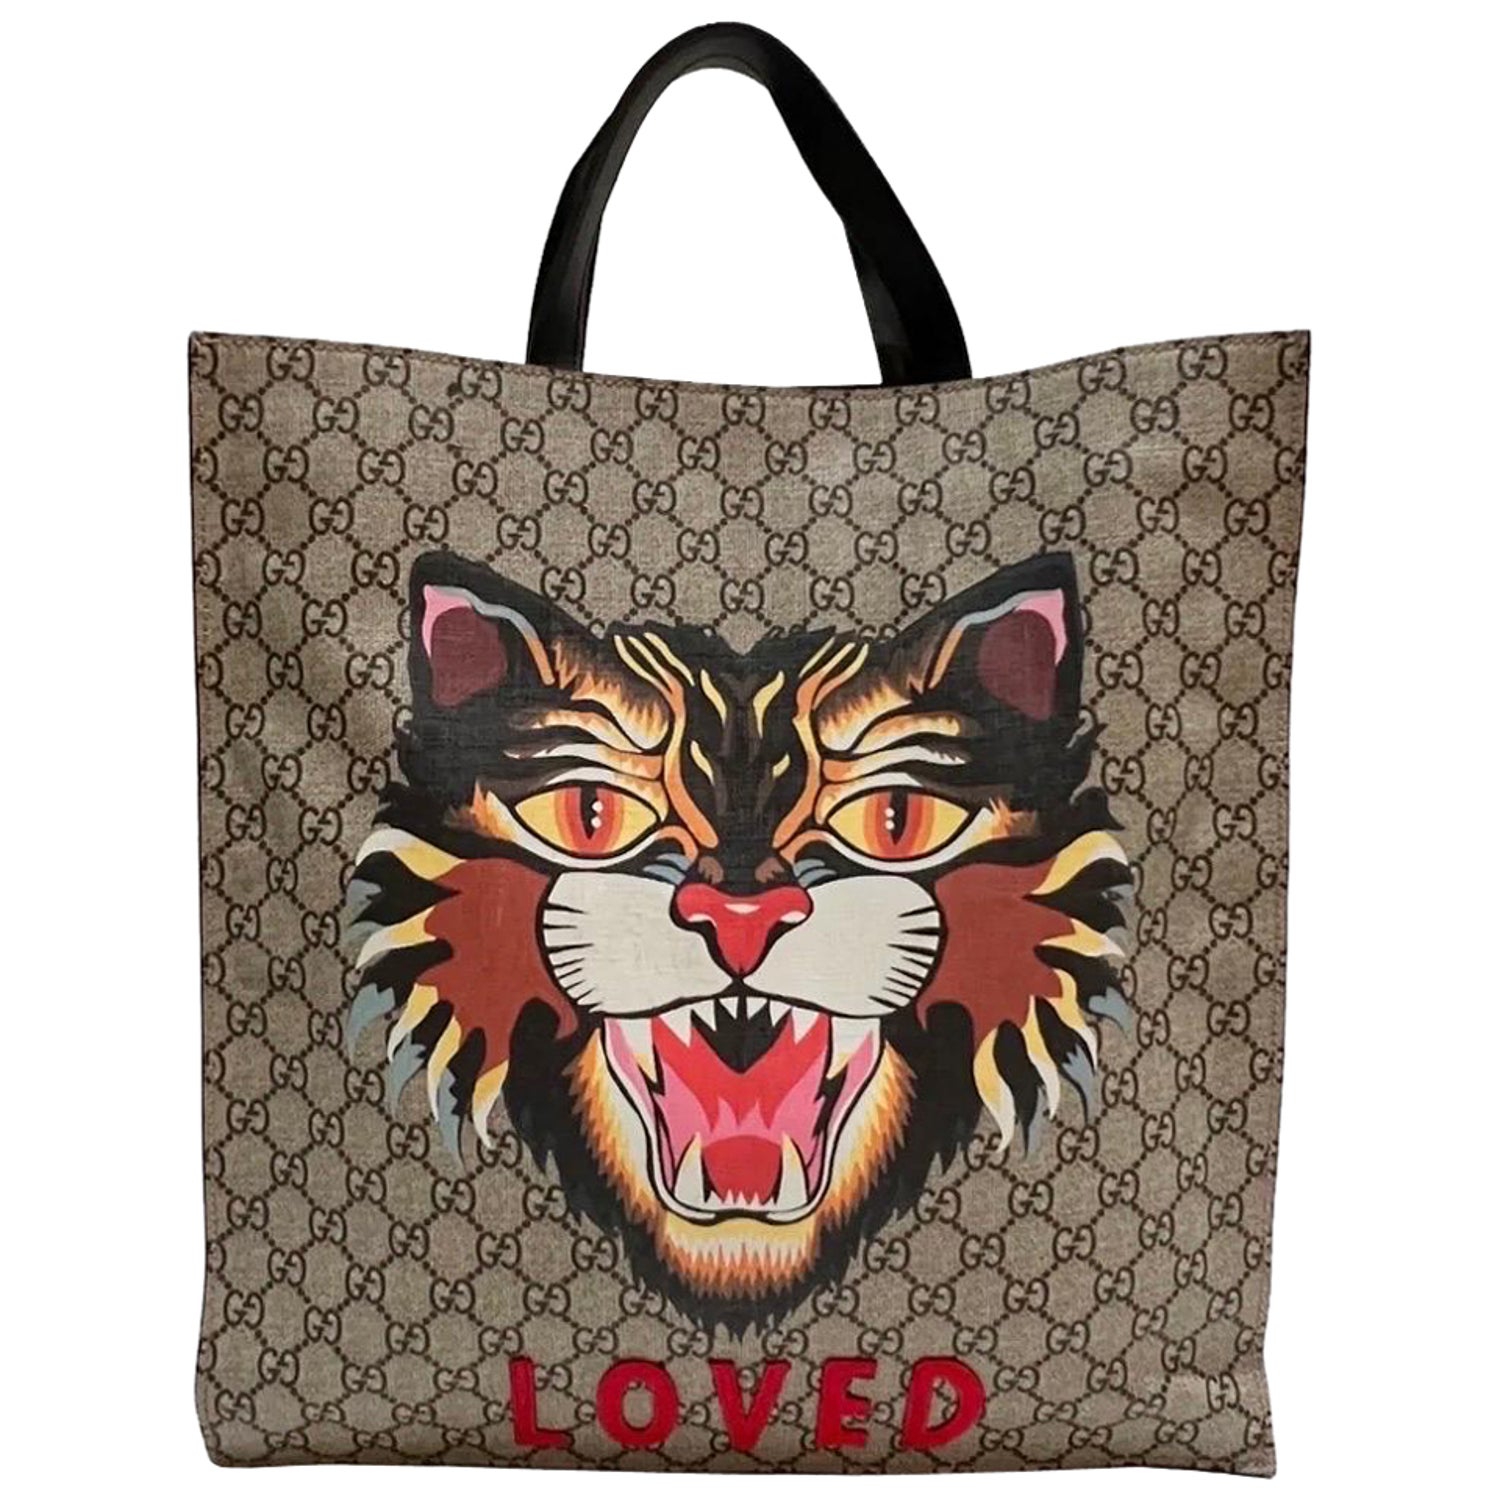 Gucci Angry Cat Tote - For Sale on 1stDibs | gucci cat bag, gucci cat tote,  gucci angry cat bag